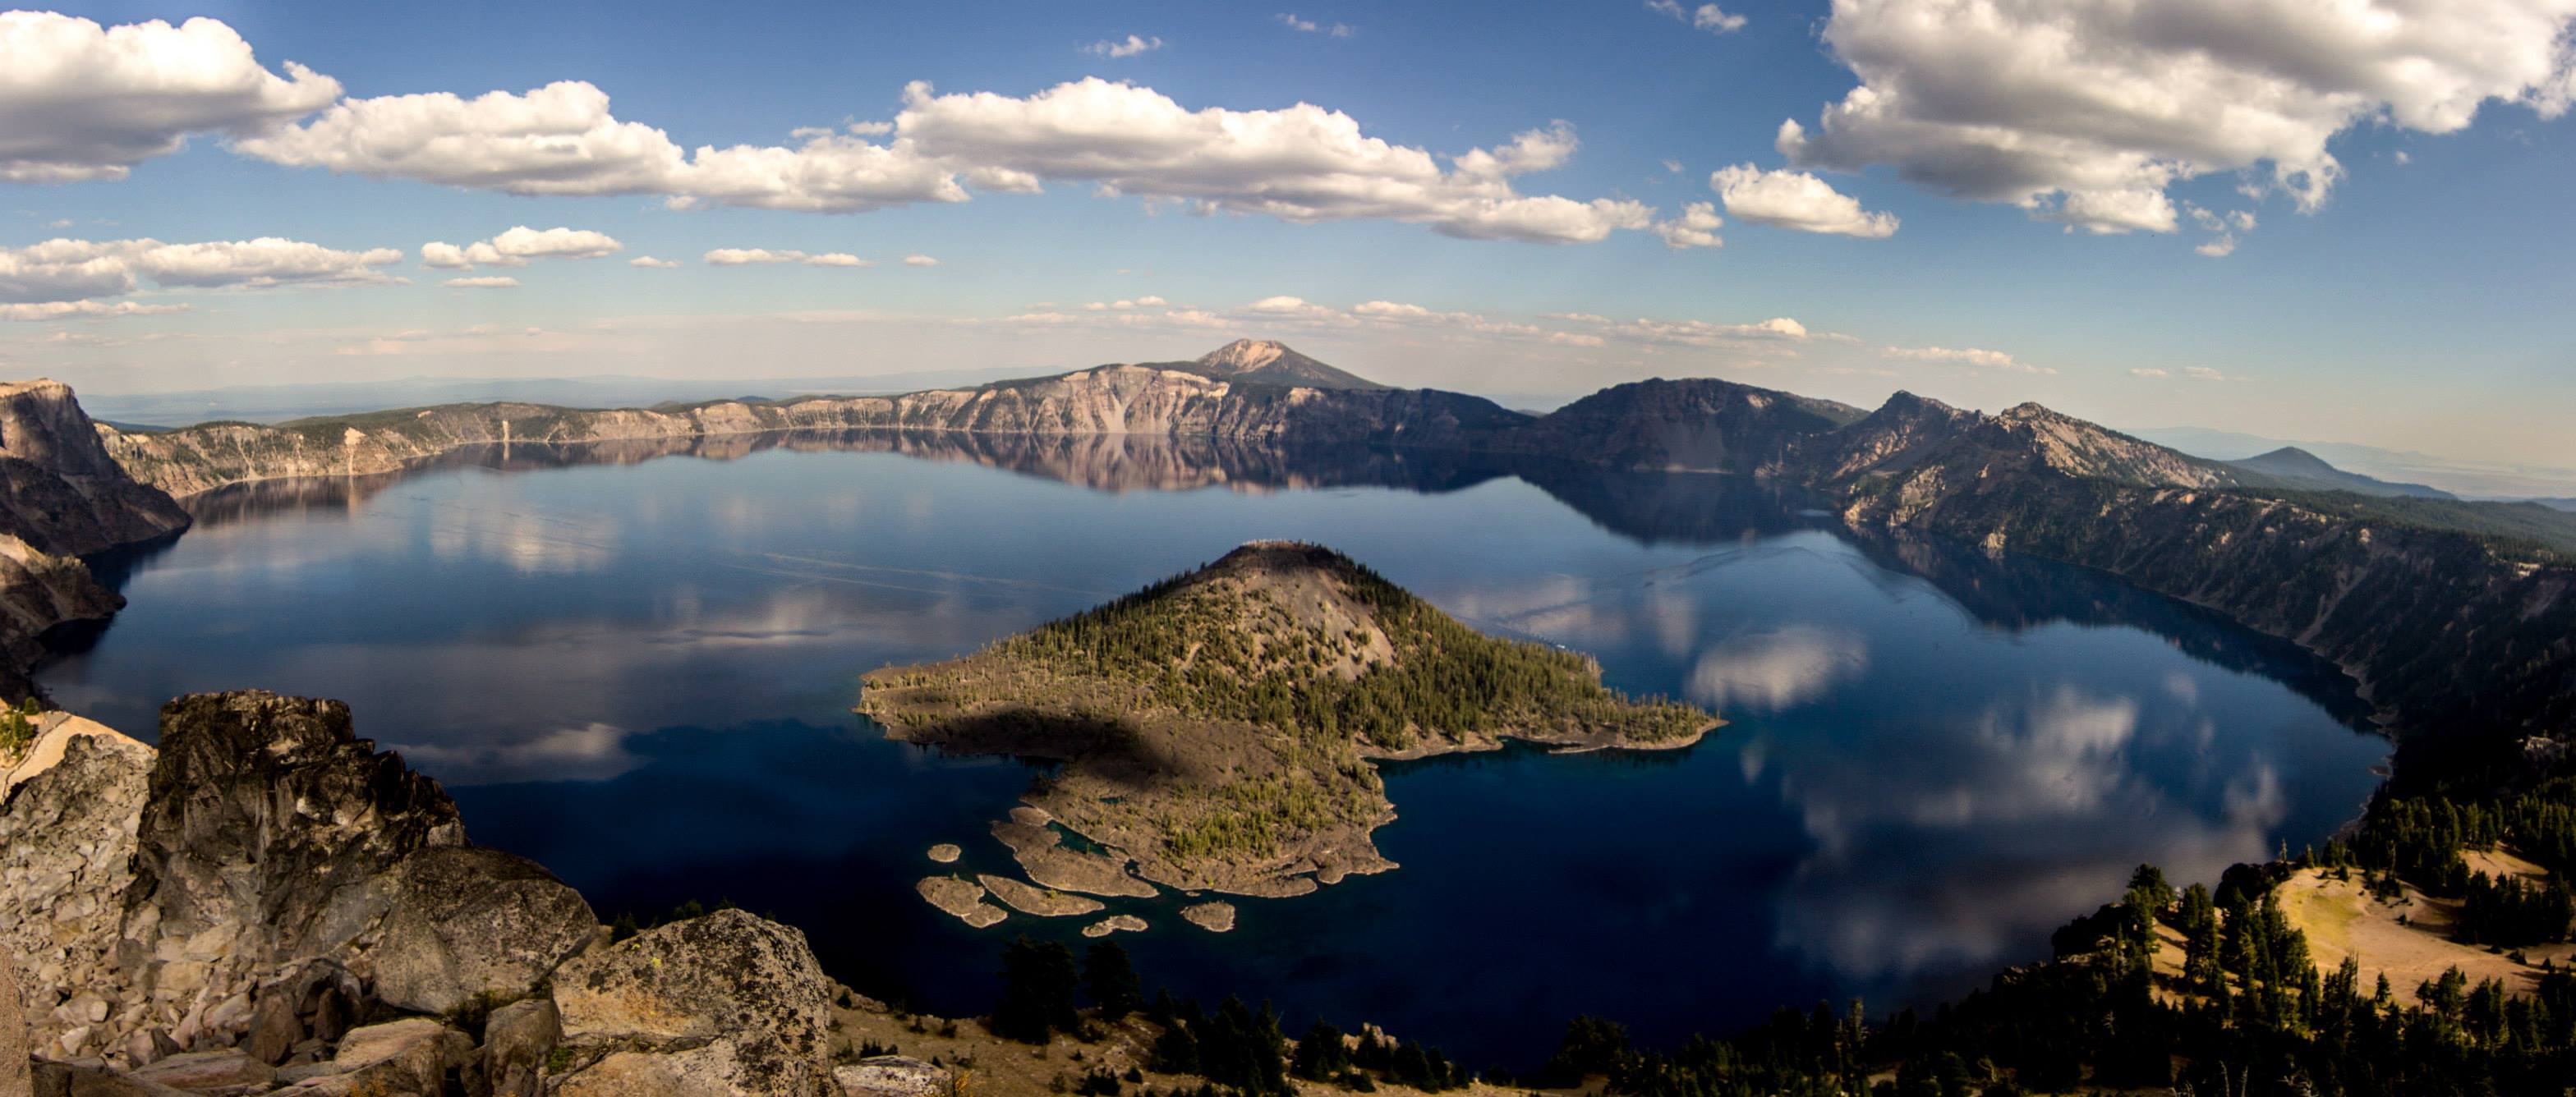 High Resolution Wallpaper | Crater Lake 3136x1336 px